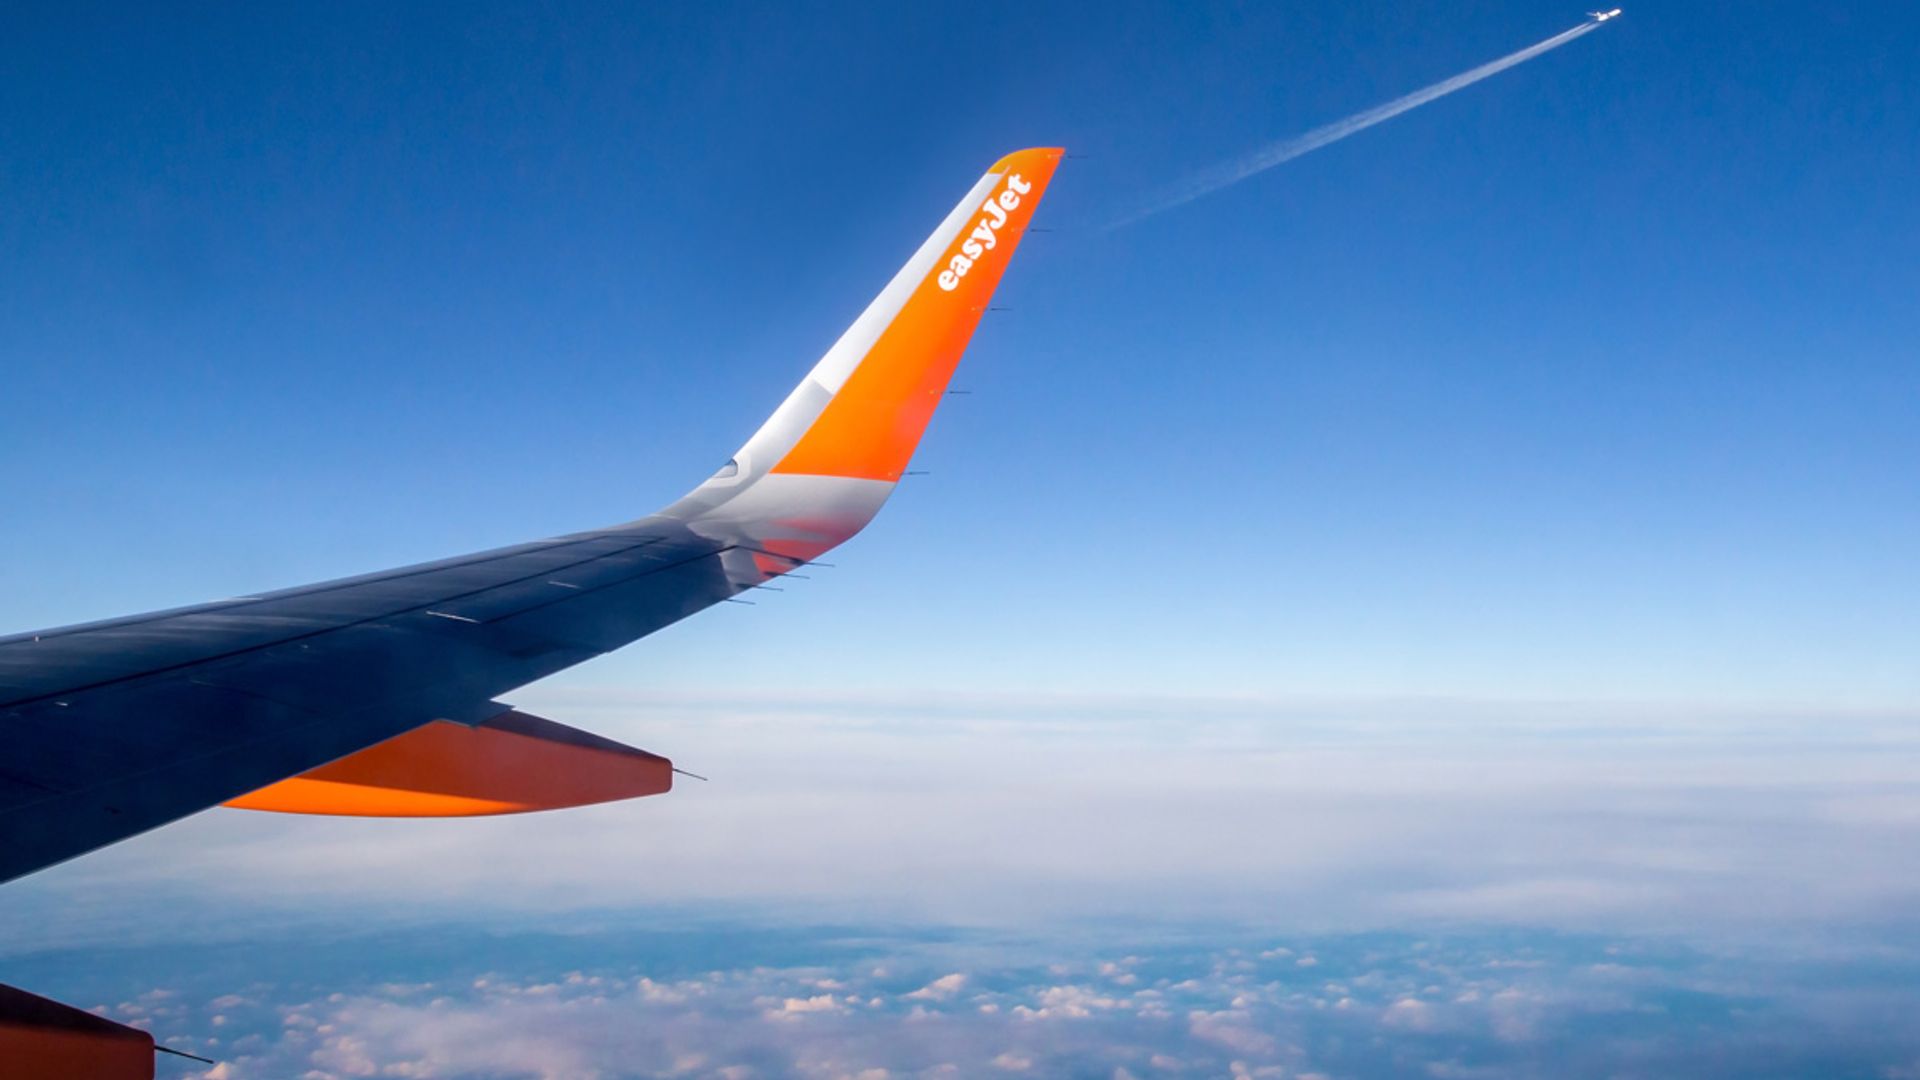 easyJet Black Friday flights are a bargain at £25 – and they last until June